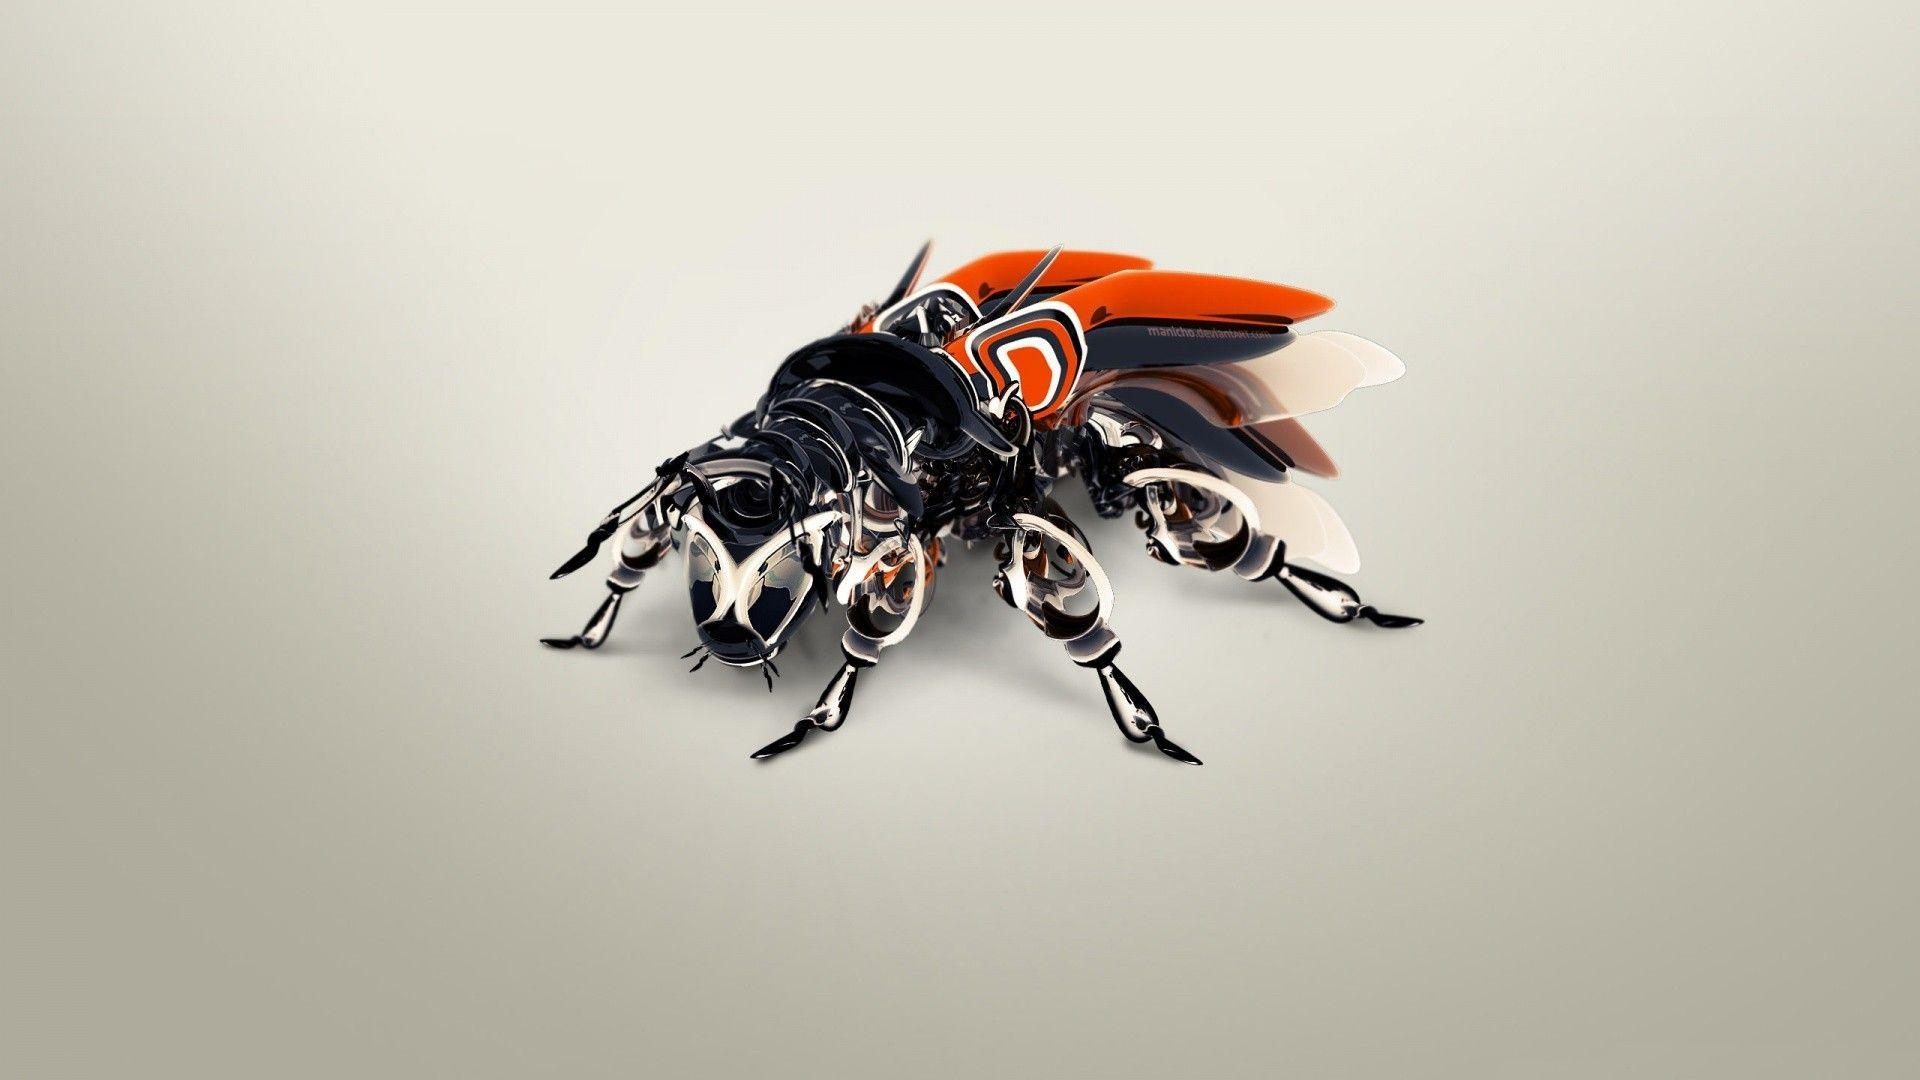 fly, mechanical, bees wallpaper